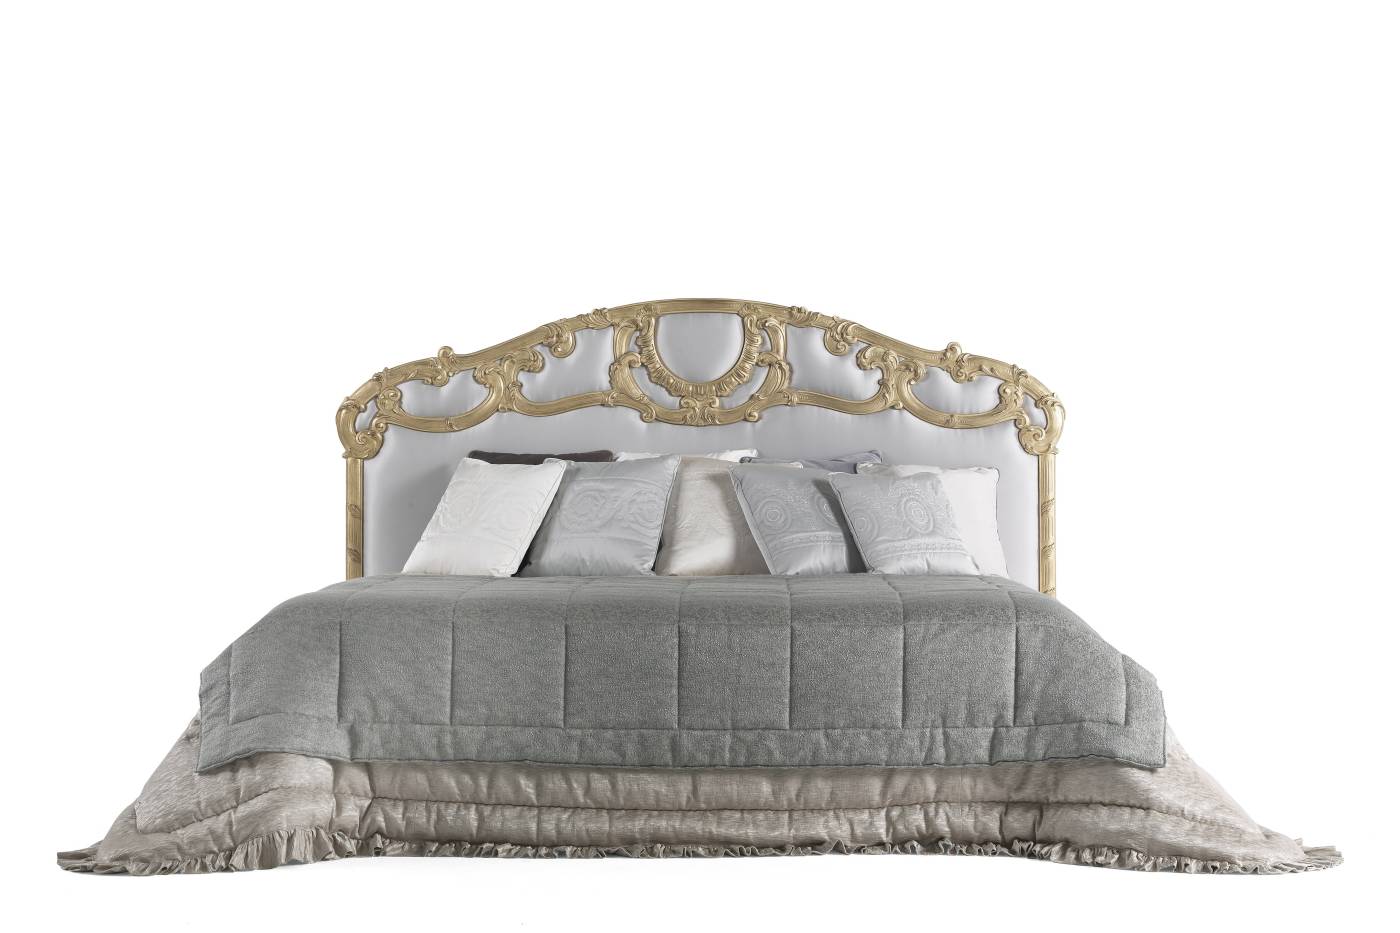 MADELEINE bed - Elevate your spaces with Made in Italy luxury classic BEDS.